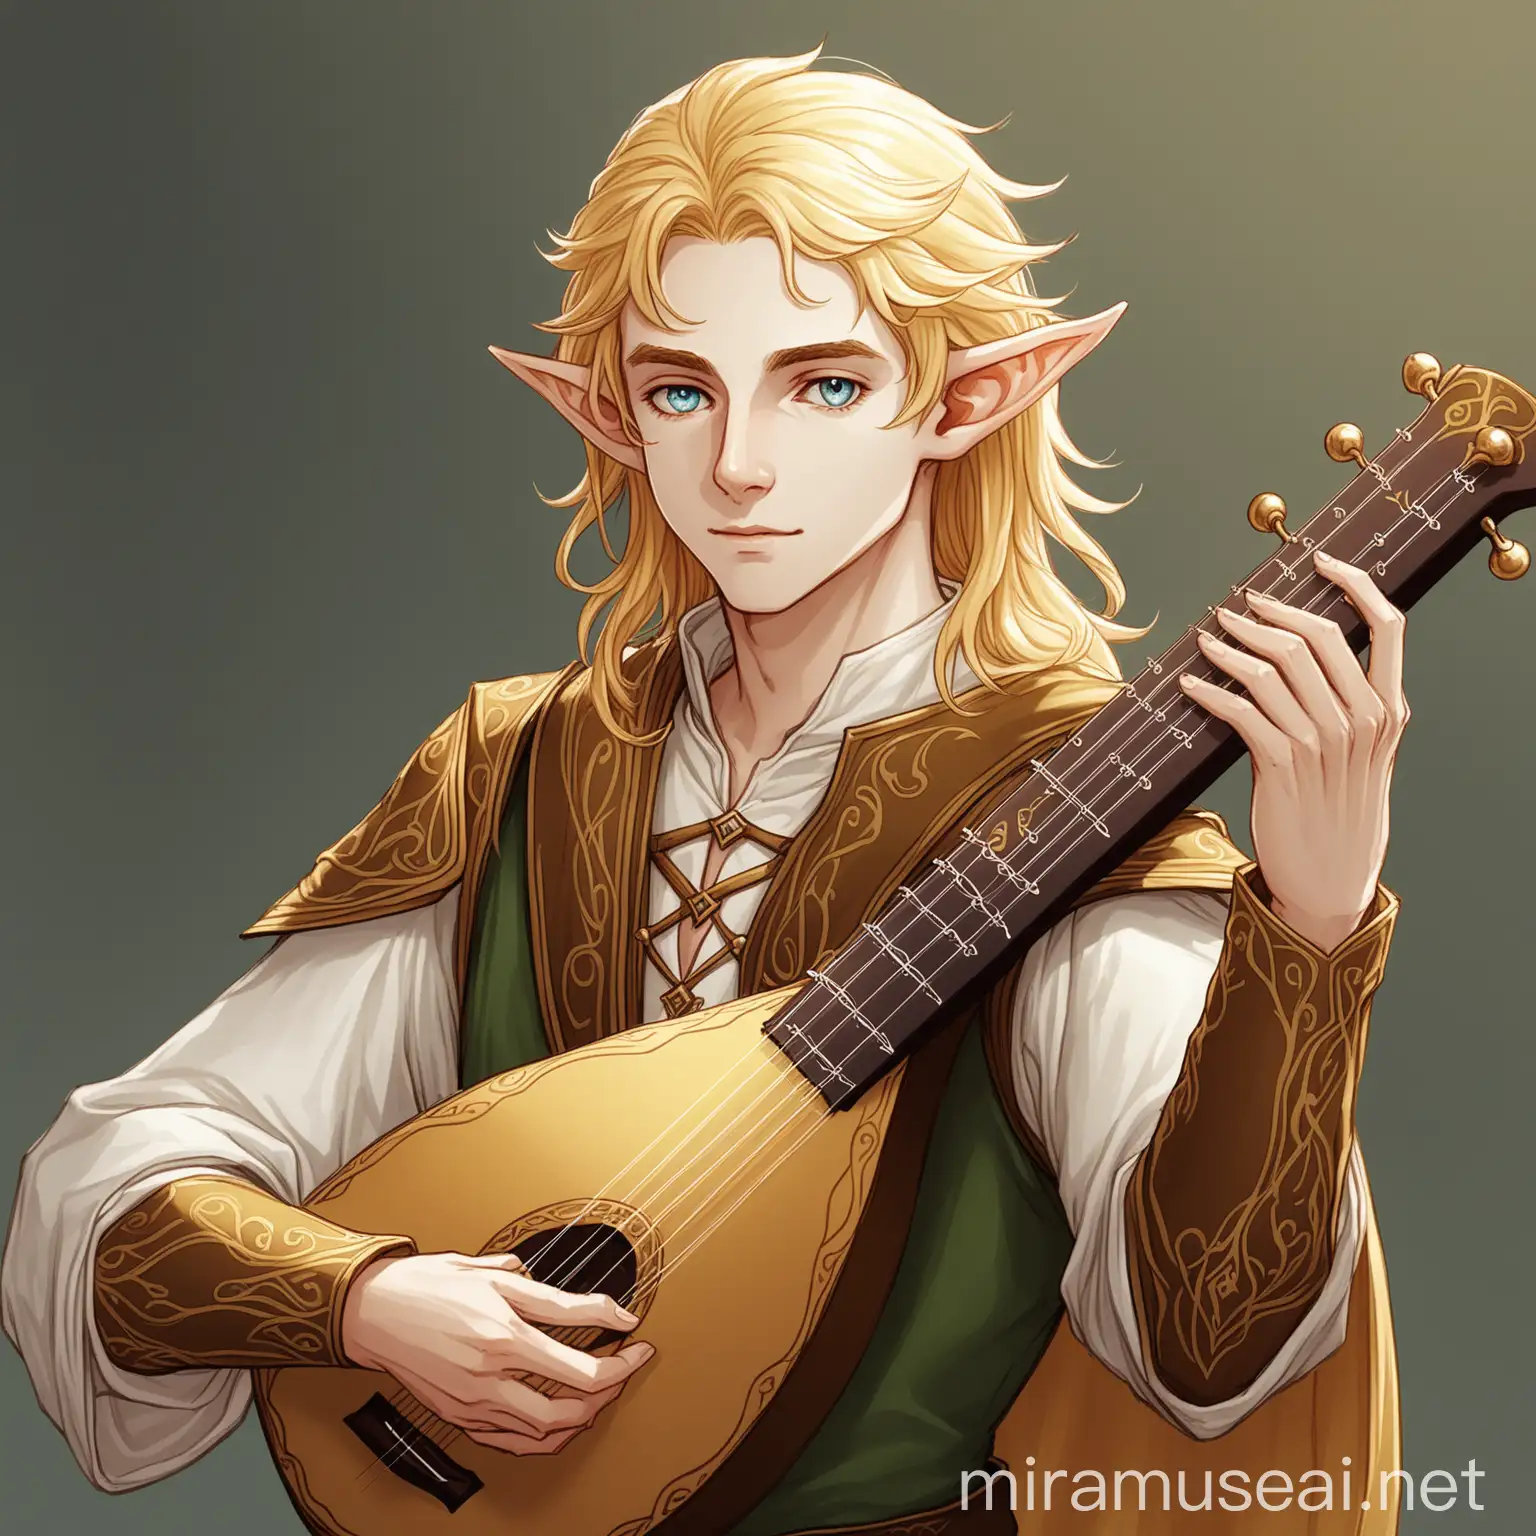 HalfElf Bard with Golden Hair Playing Lute